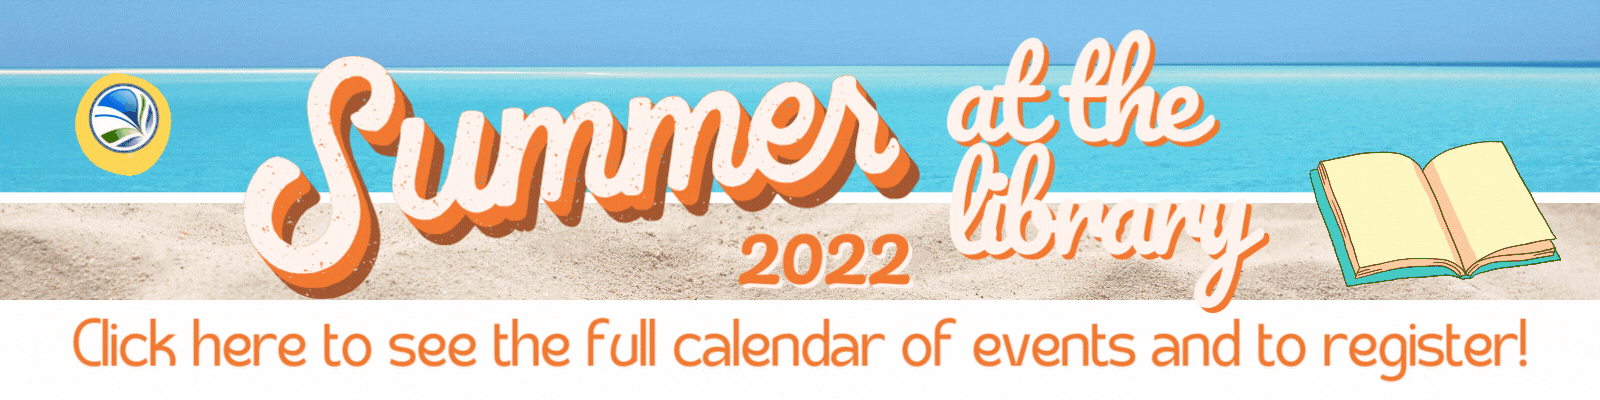 Summer 2022 at the library; click here for more information